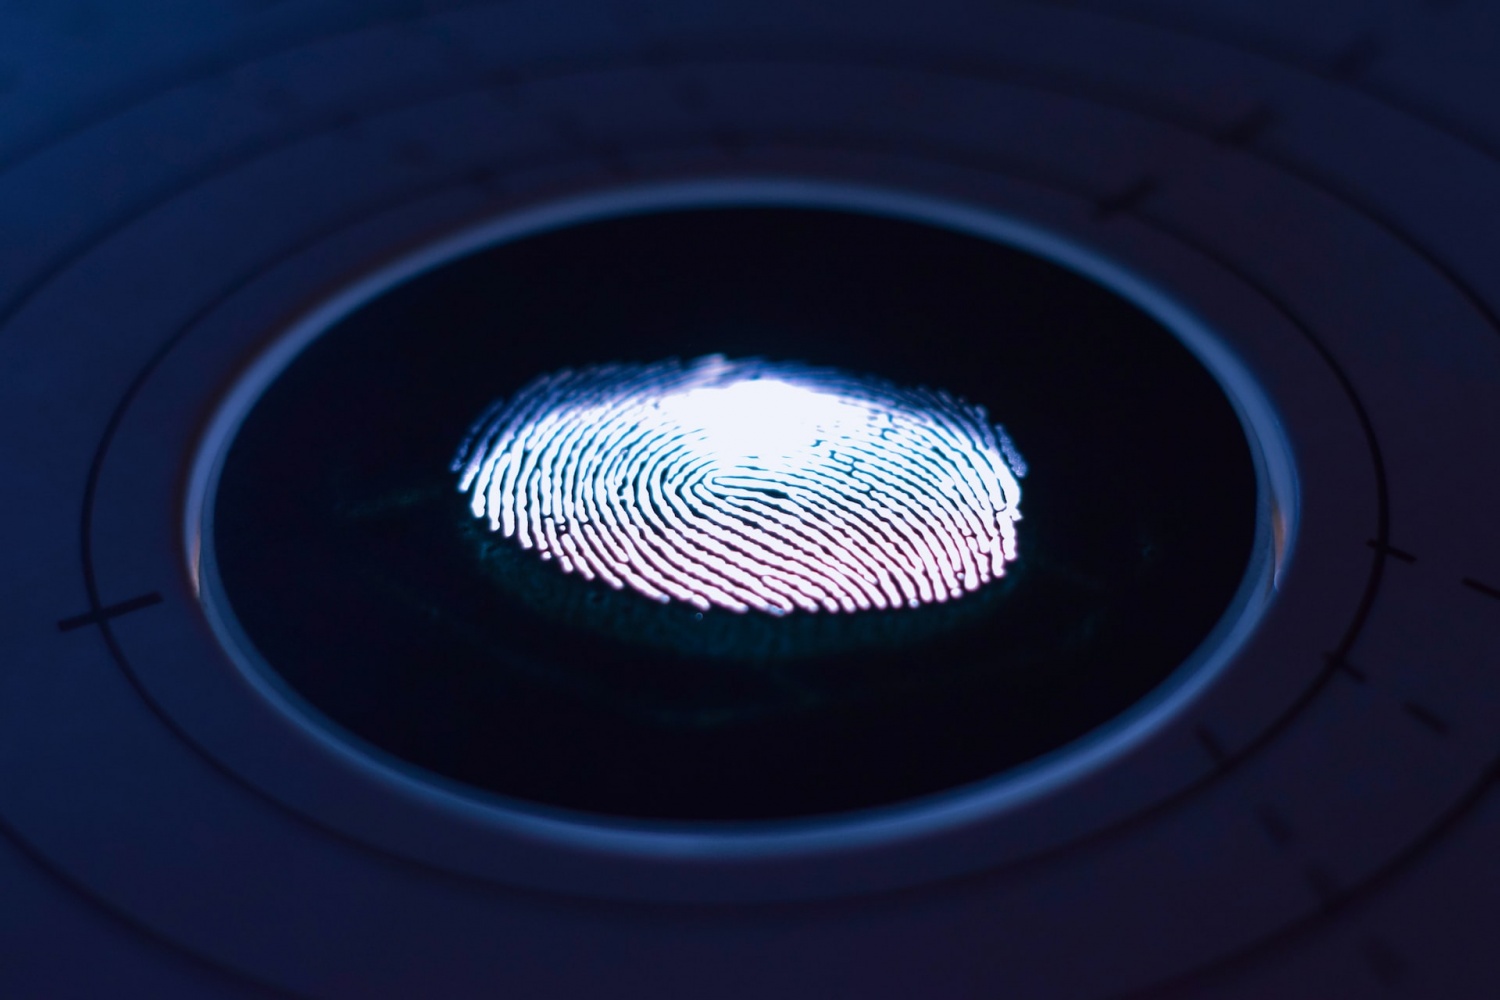 Samsung OLED 2.0 Fingerprint Sensors Will Change Everything with a Close-to-Zero Failure Rate